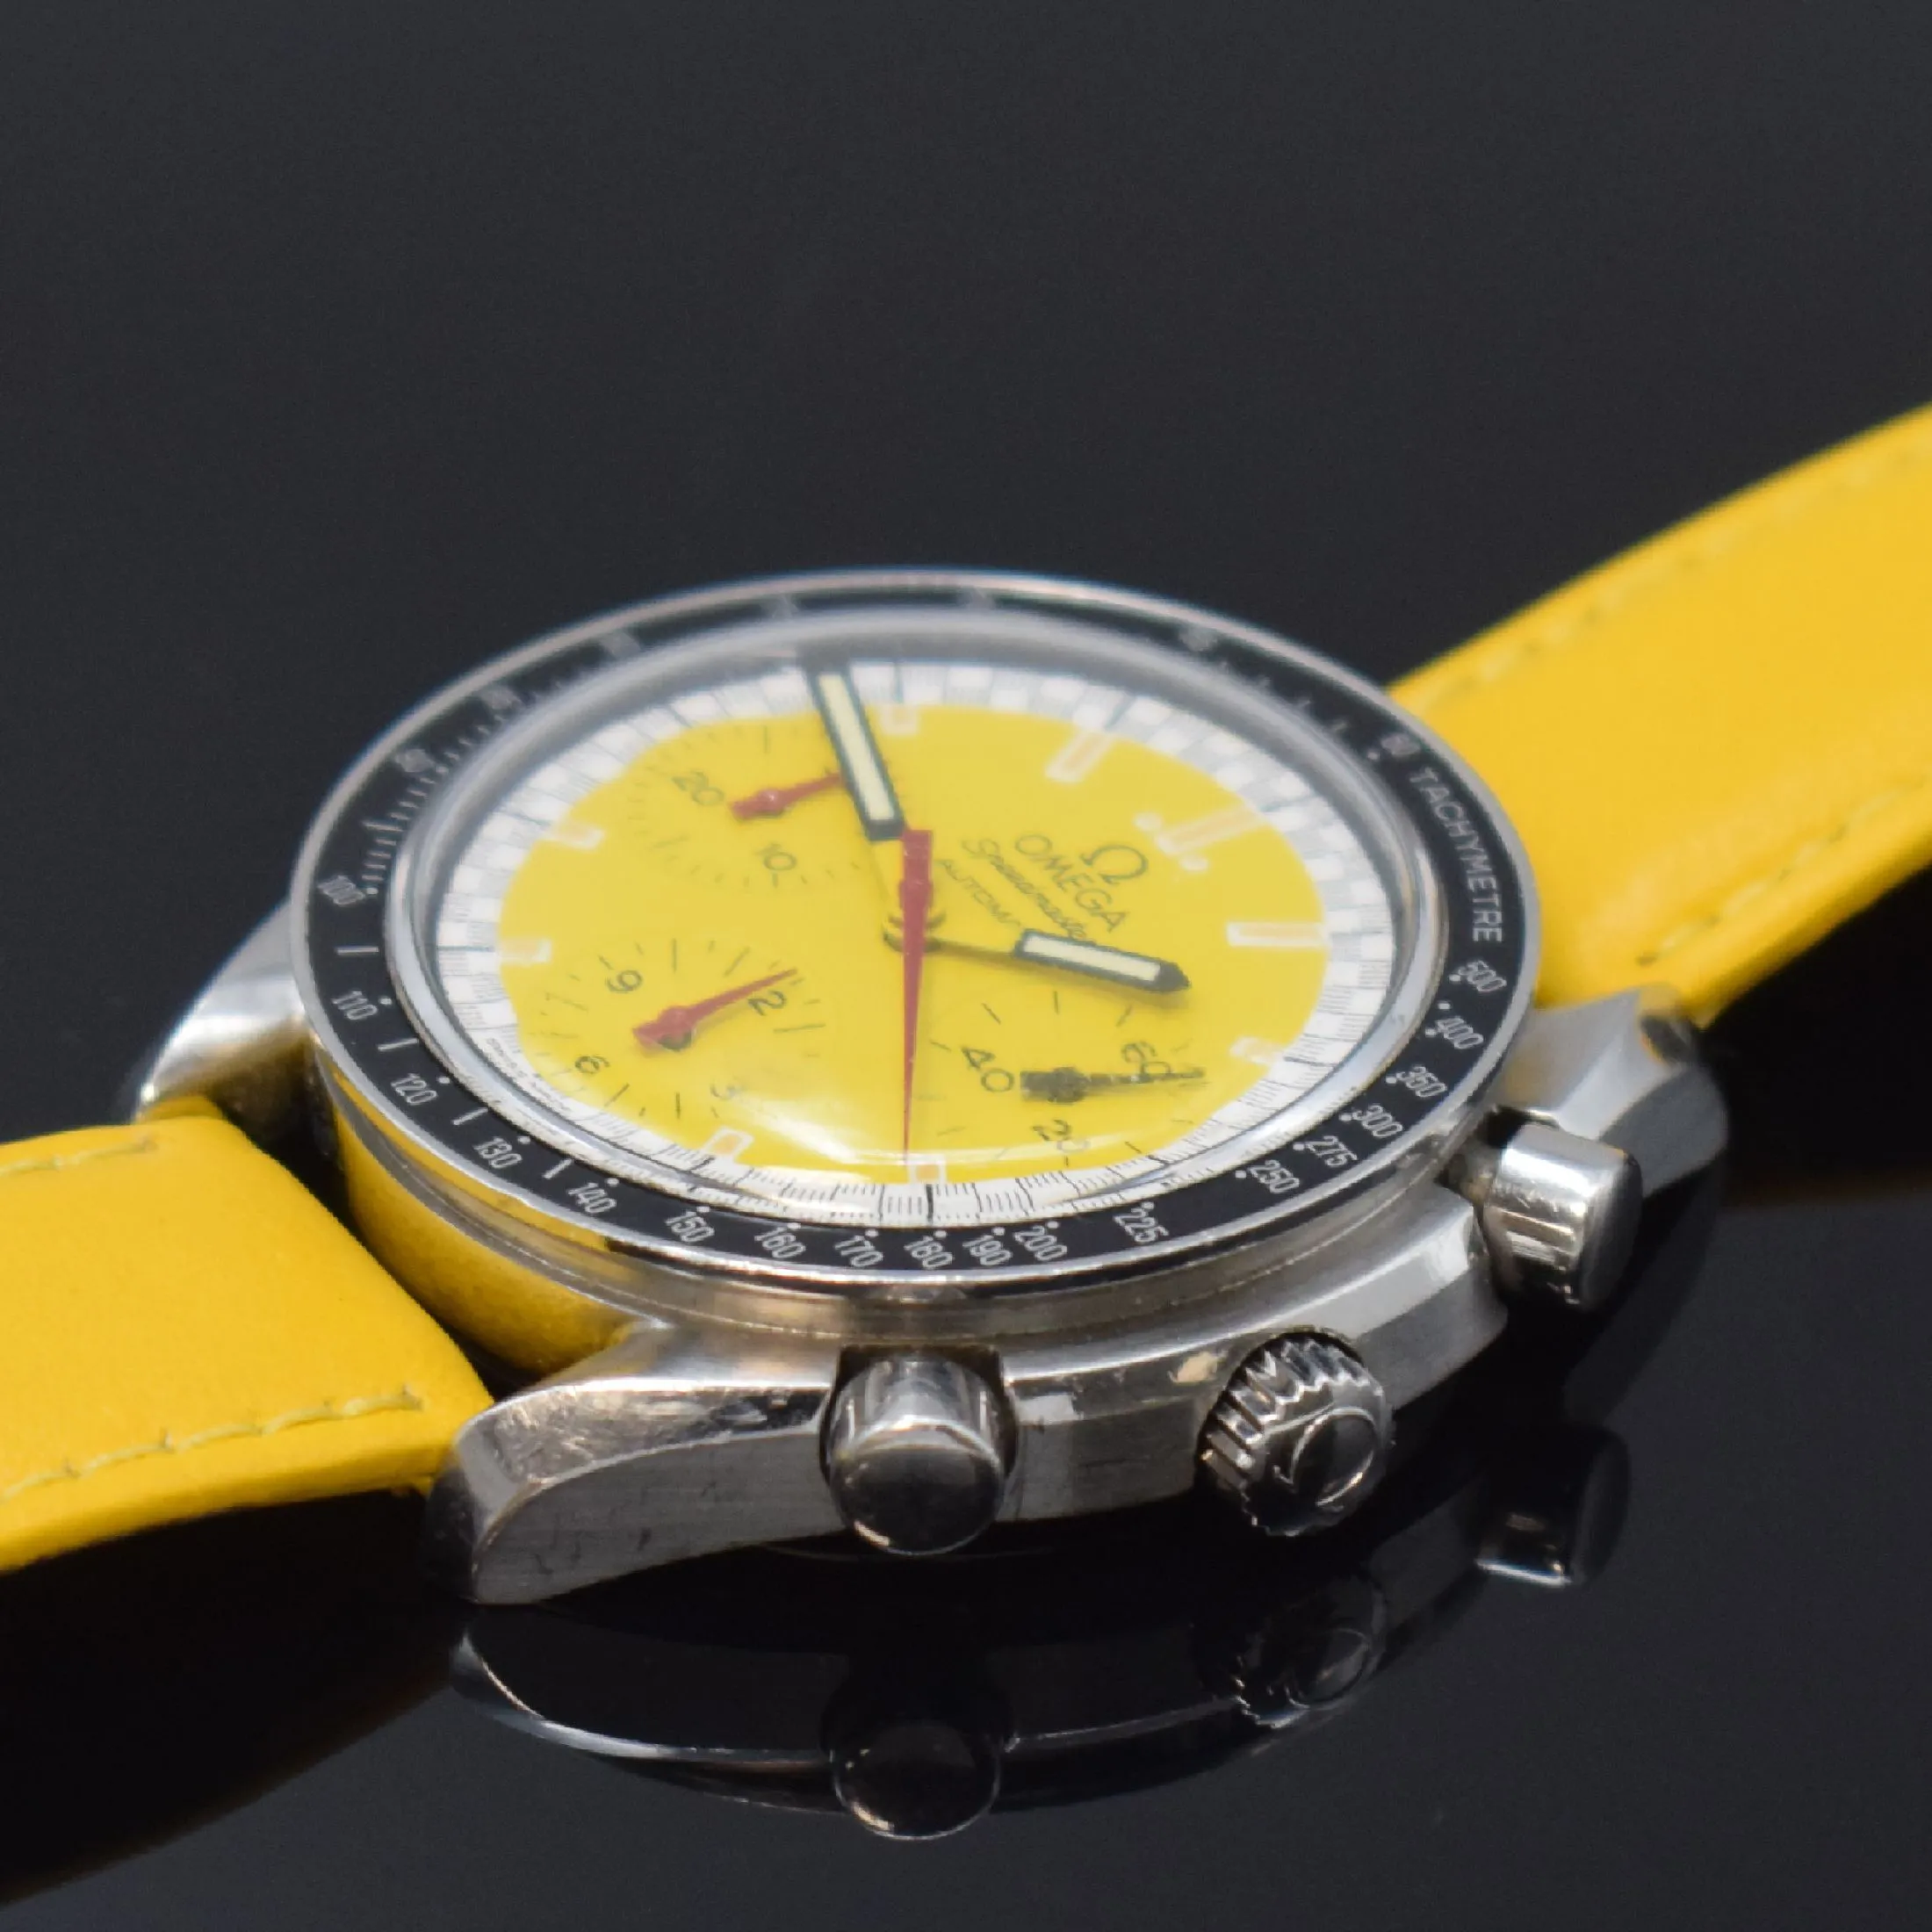 Omega Speedmaster Reduced 175.0032.1/ 175.0033.1 39mm Stainless steel Yellow 2